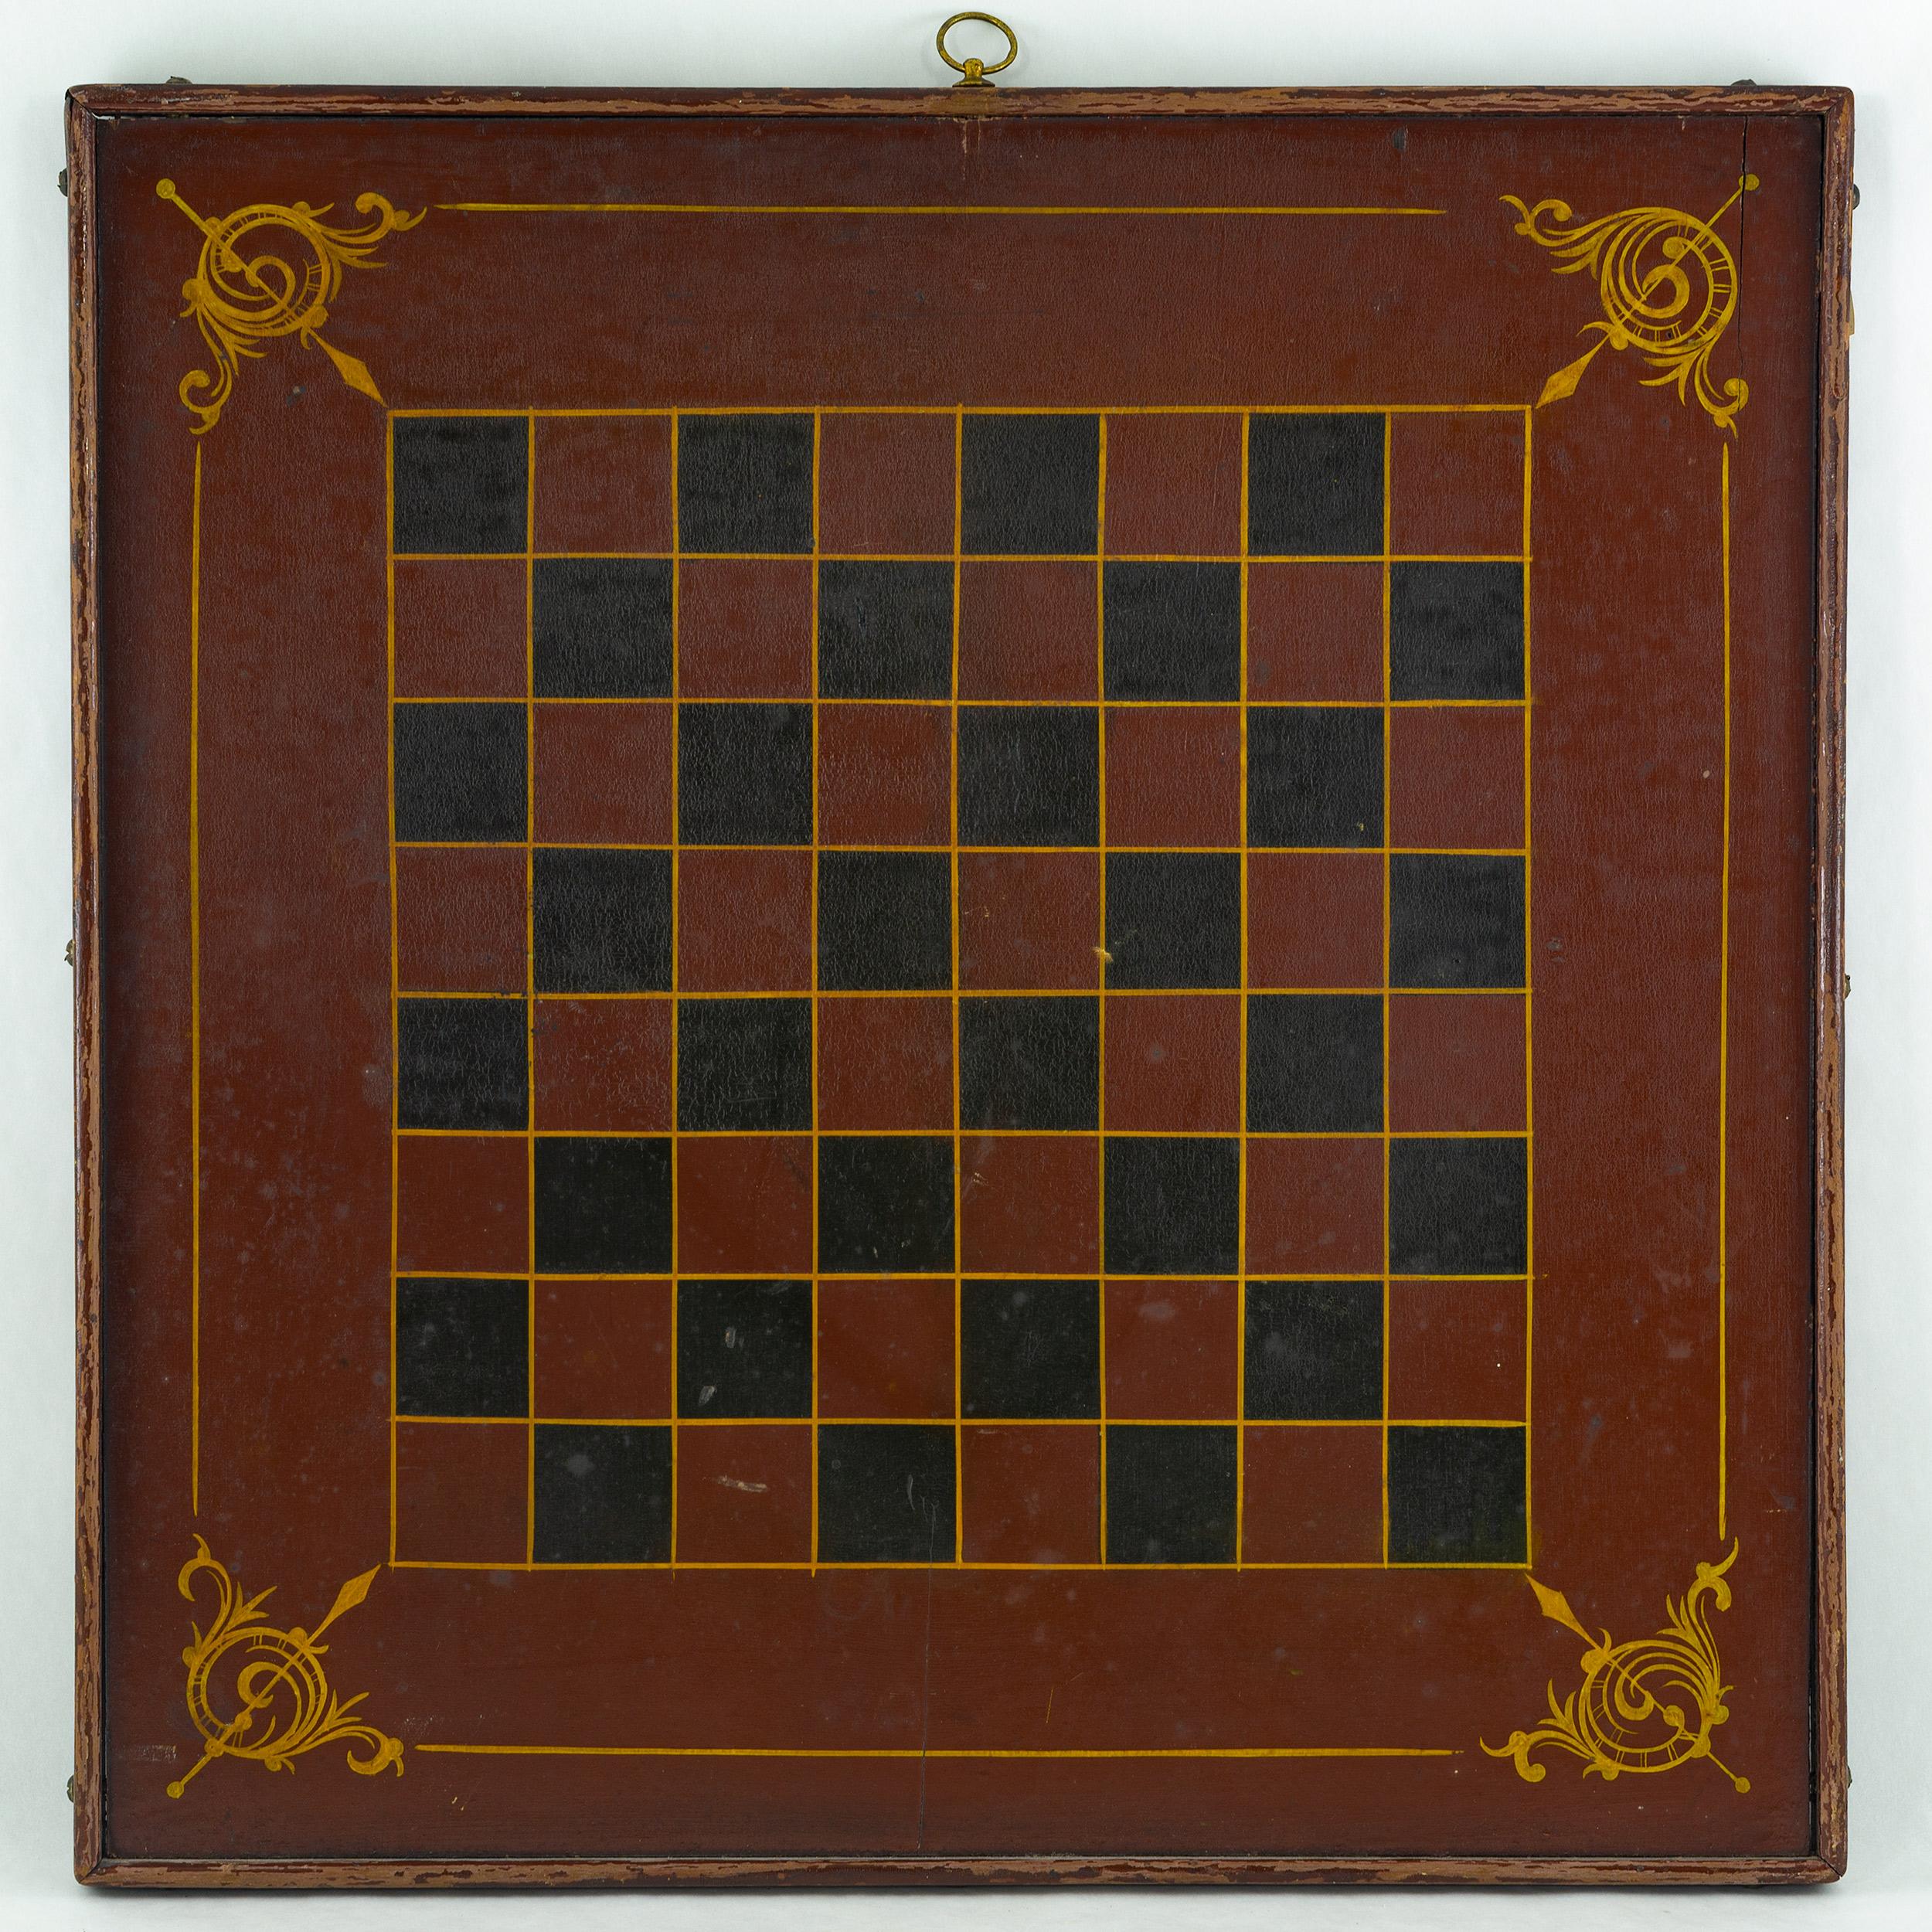 Polychrome double sided game board. The parcheesi board is painted with six colors, including a crimson red background and yellow dividing lines with red, green, blue, and black playing areas. The opposing side is a checkboard with a crimson red and